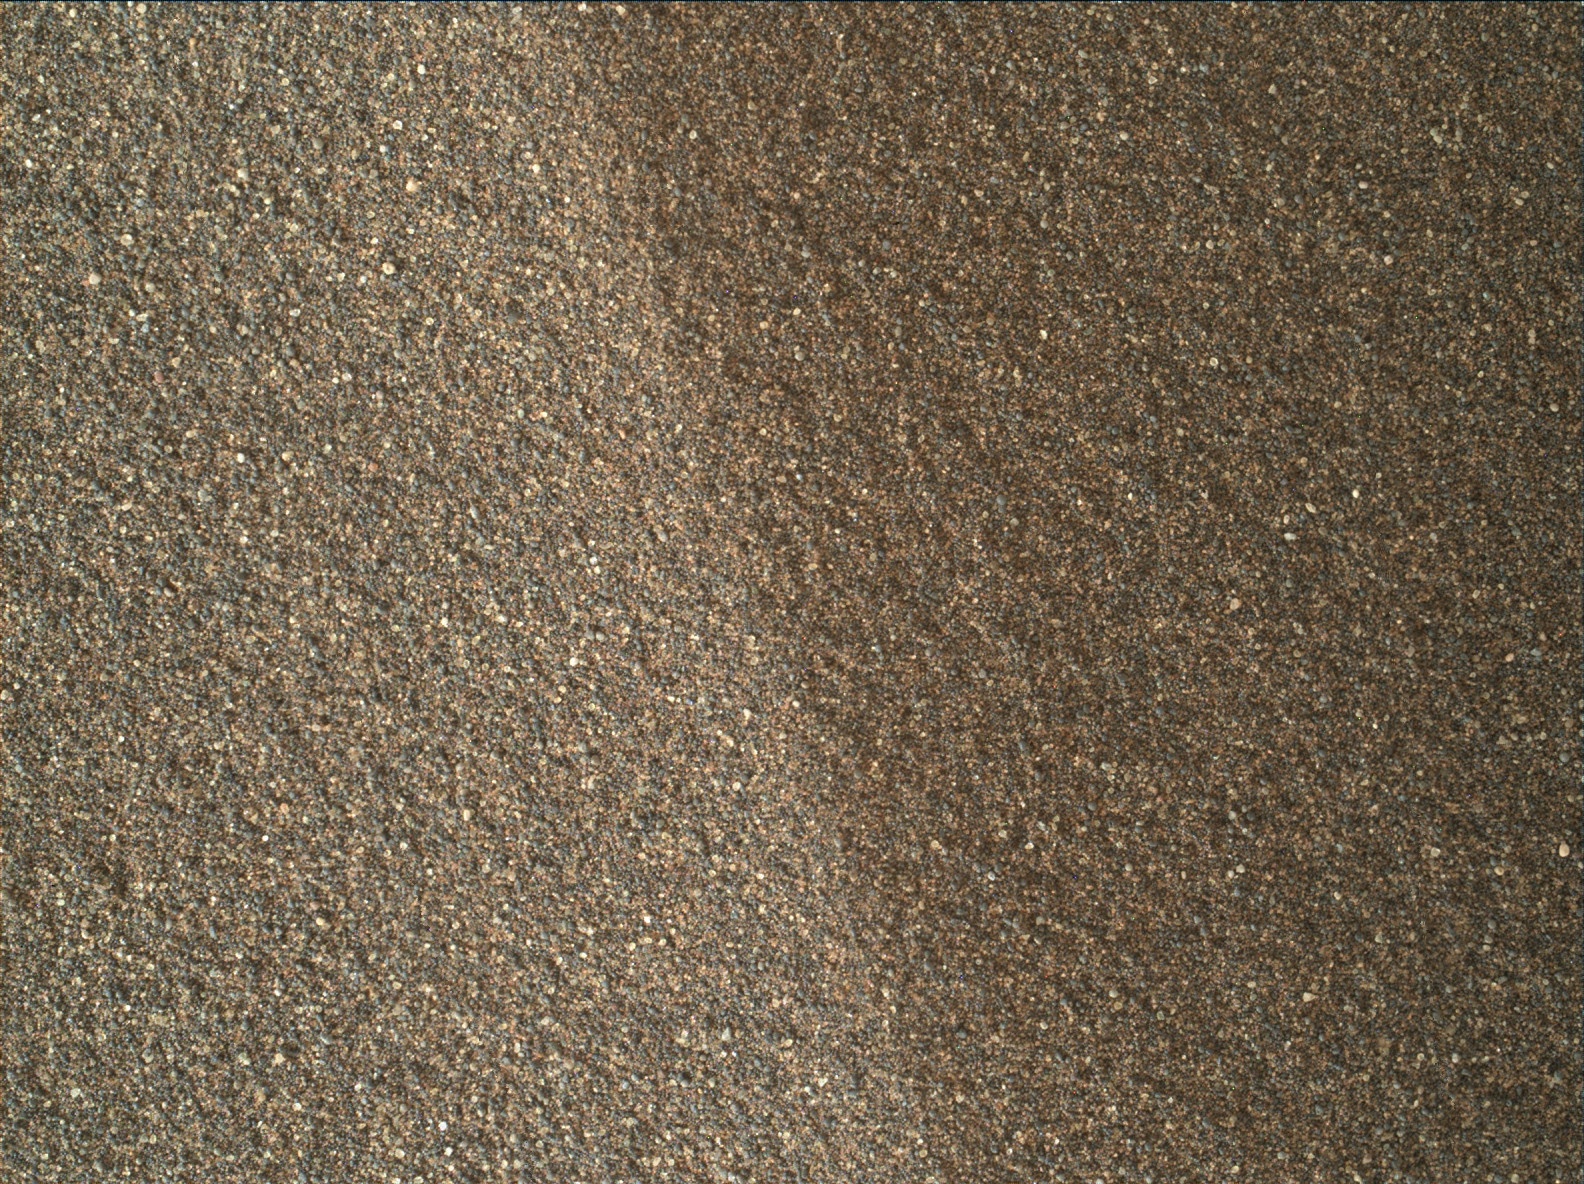 Nasa's Mars rover Curiosity acquired this image using its Mars Hand Lens Imager (MAHLI) on Sol 2026